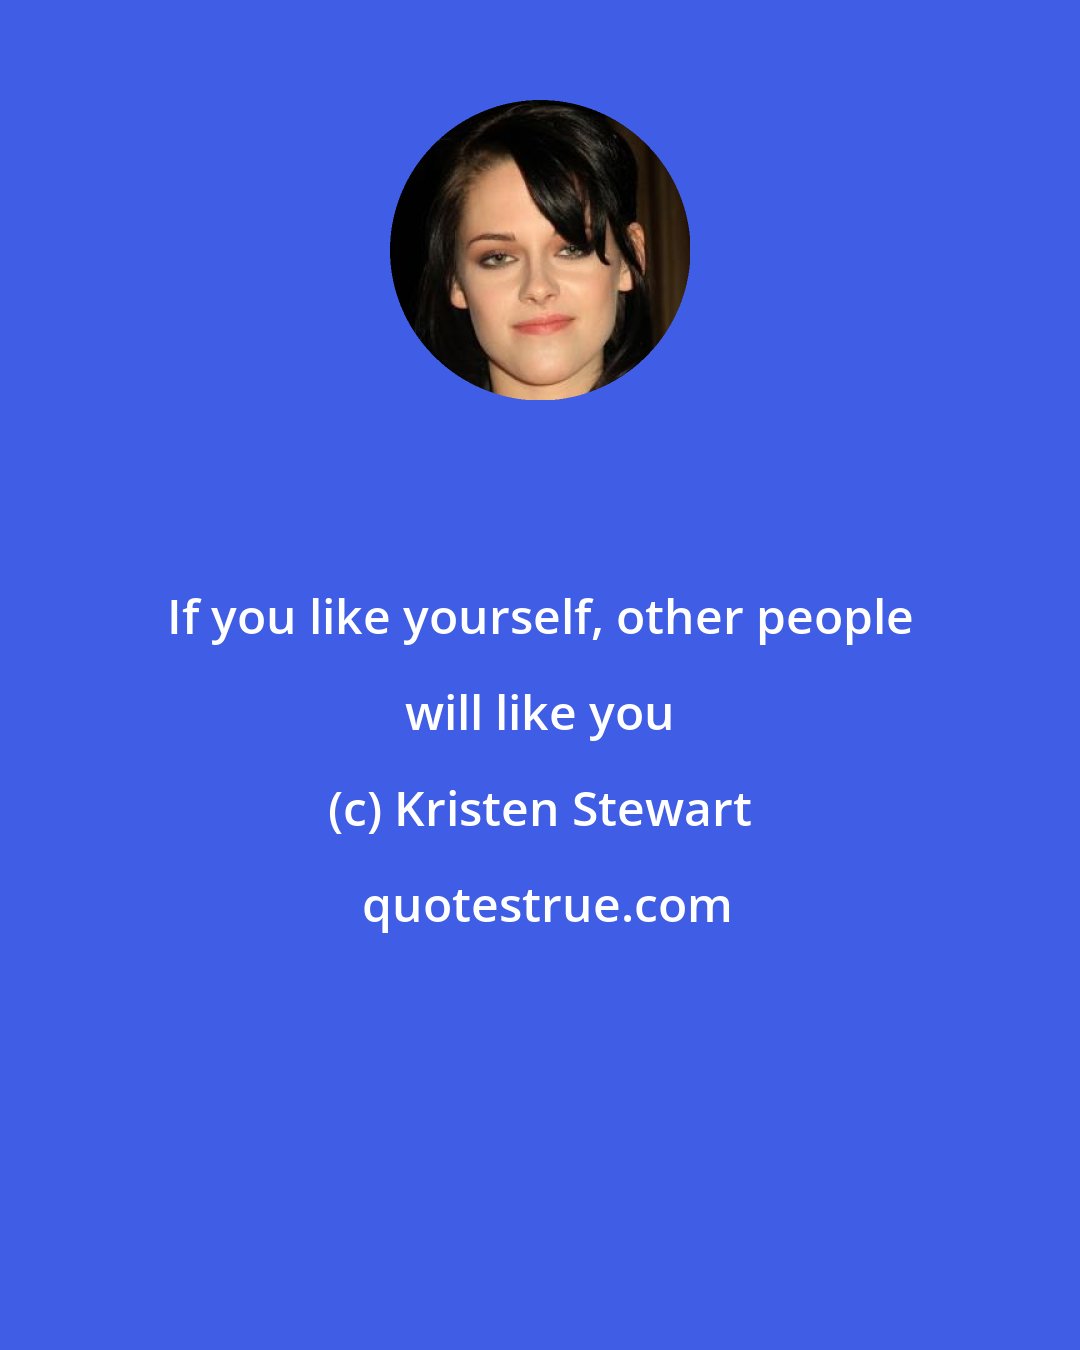 Kristen Stewart: If you like yourself, other people will like you